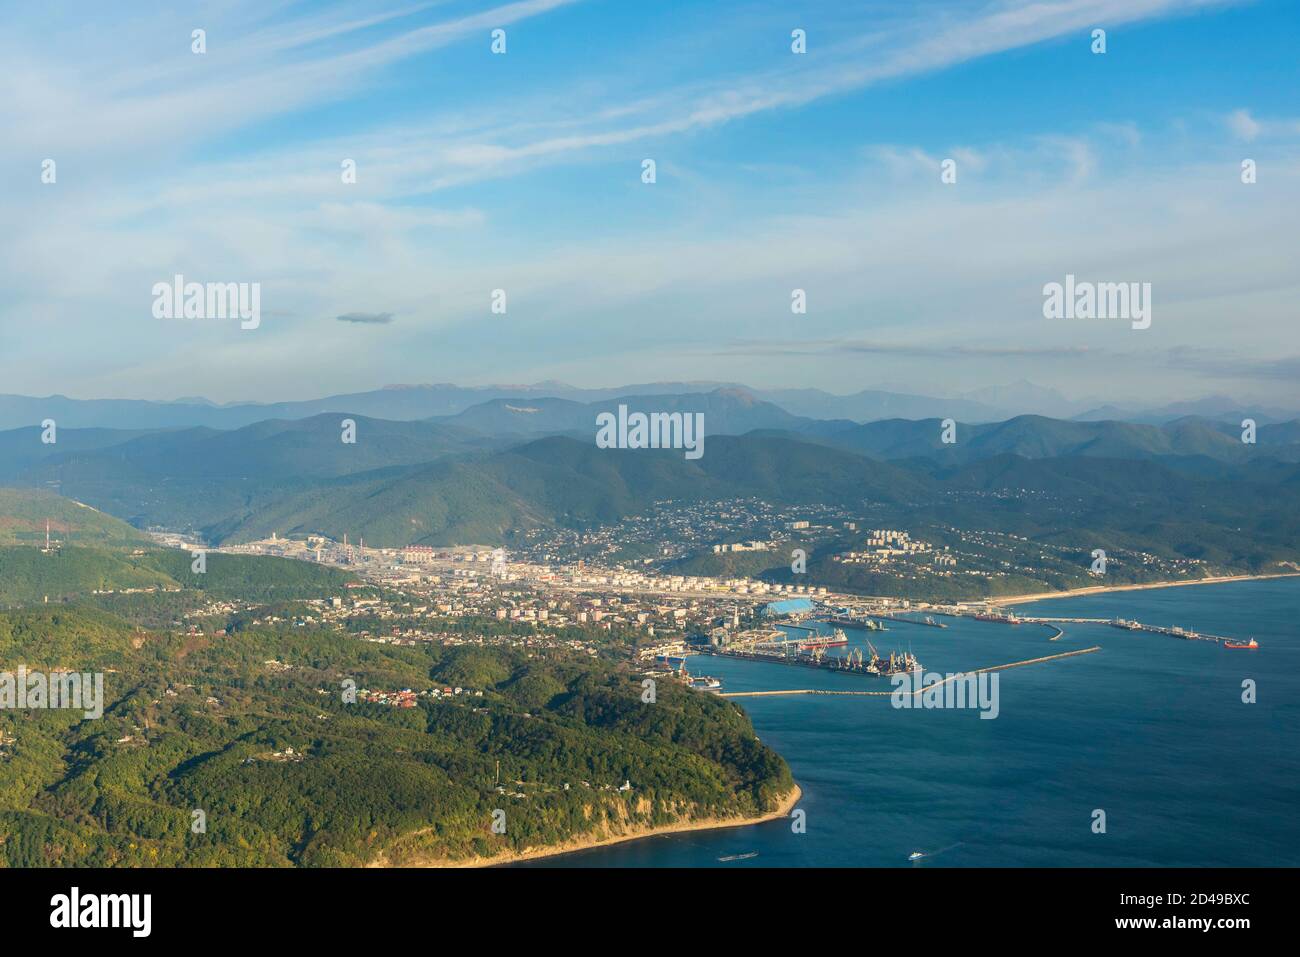 Aerial view of Tuapse city, Russia Stock Photo